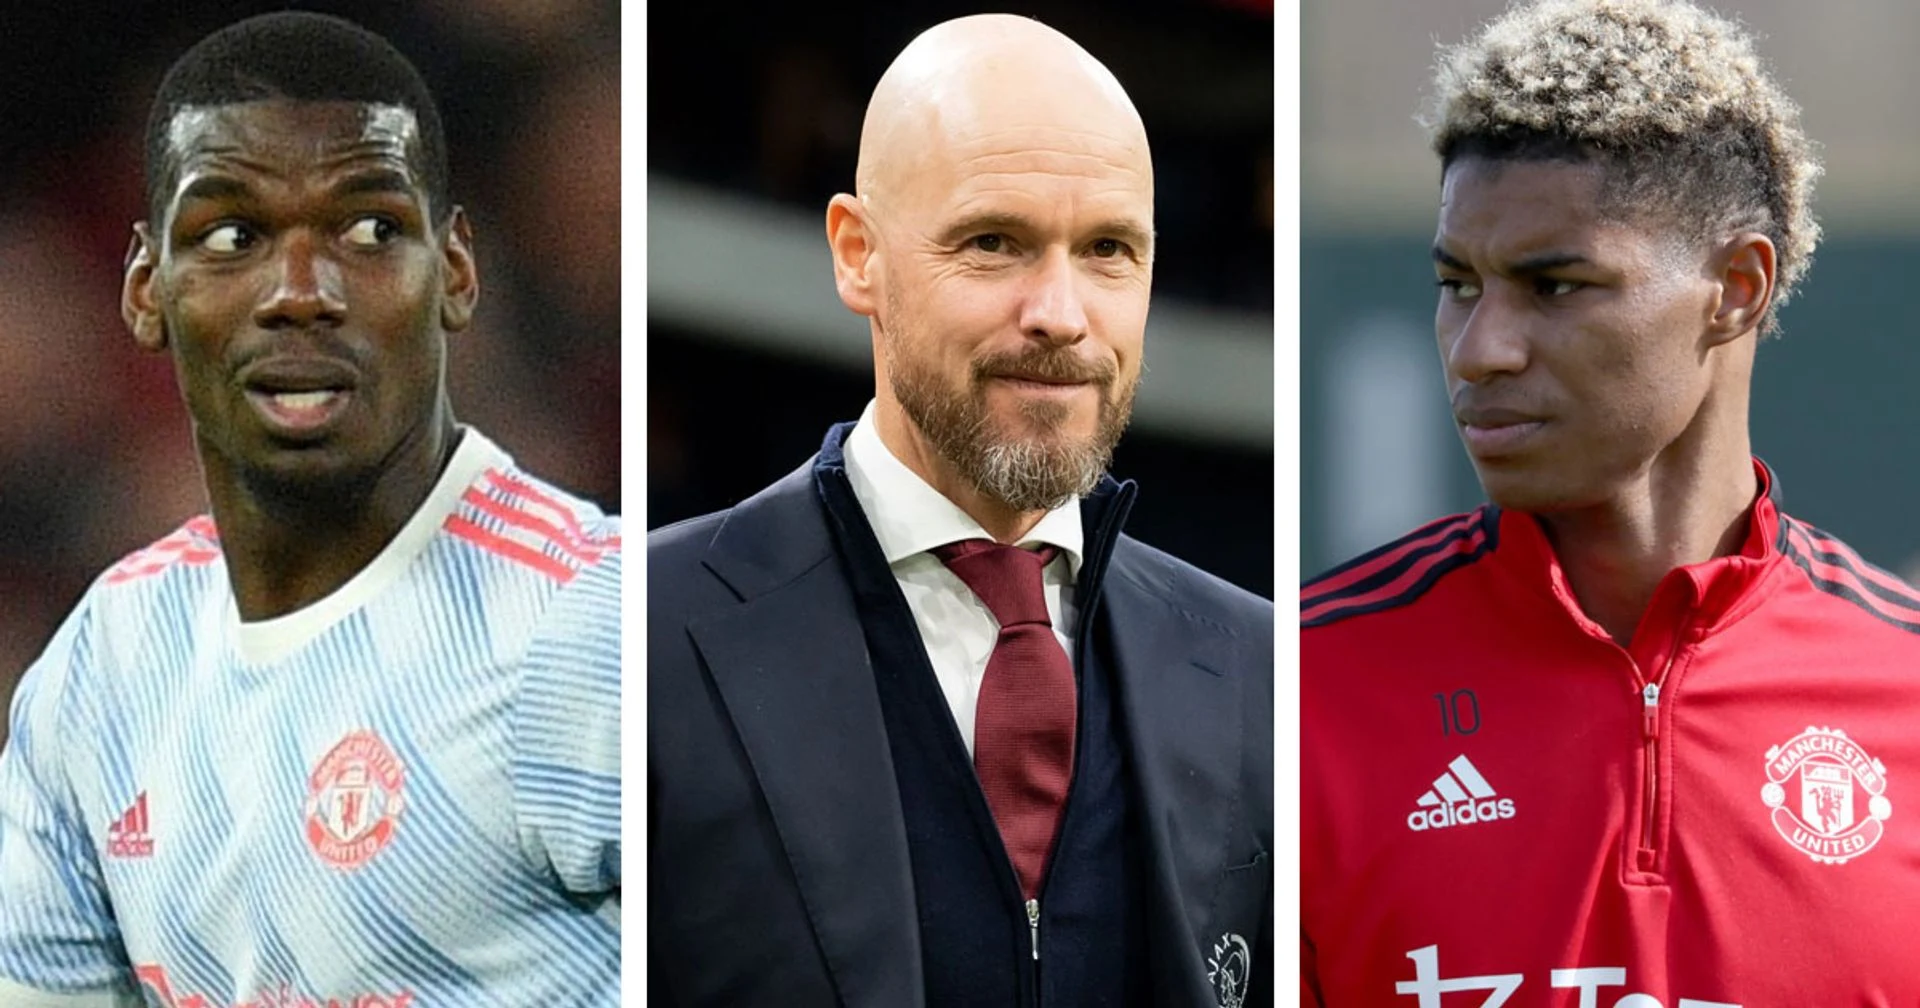 Ten Hag to be given £200m budget for ‘complete squad overhaul’ - 12 players could be allowed to leave